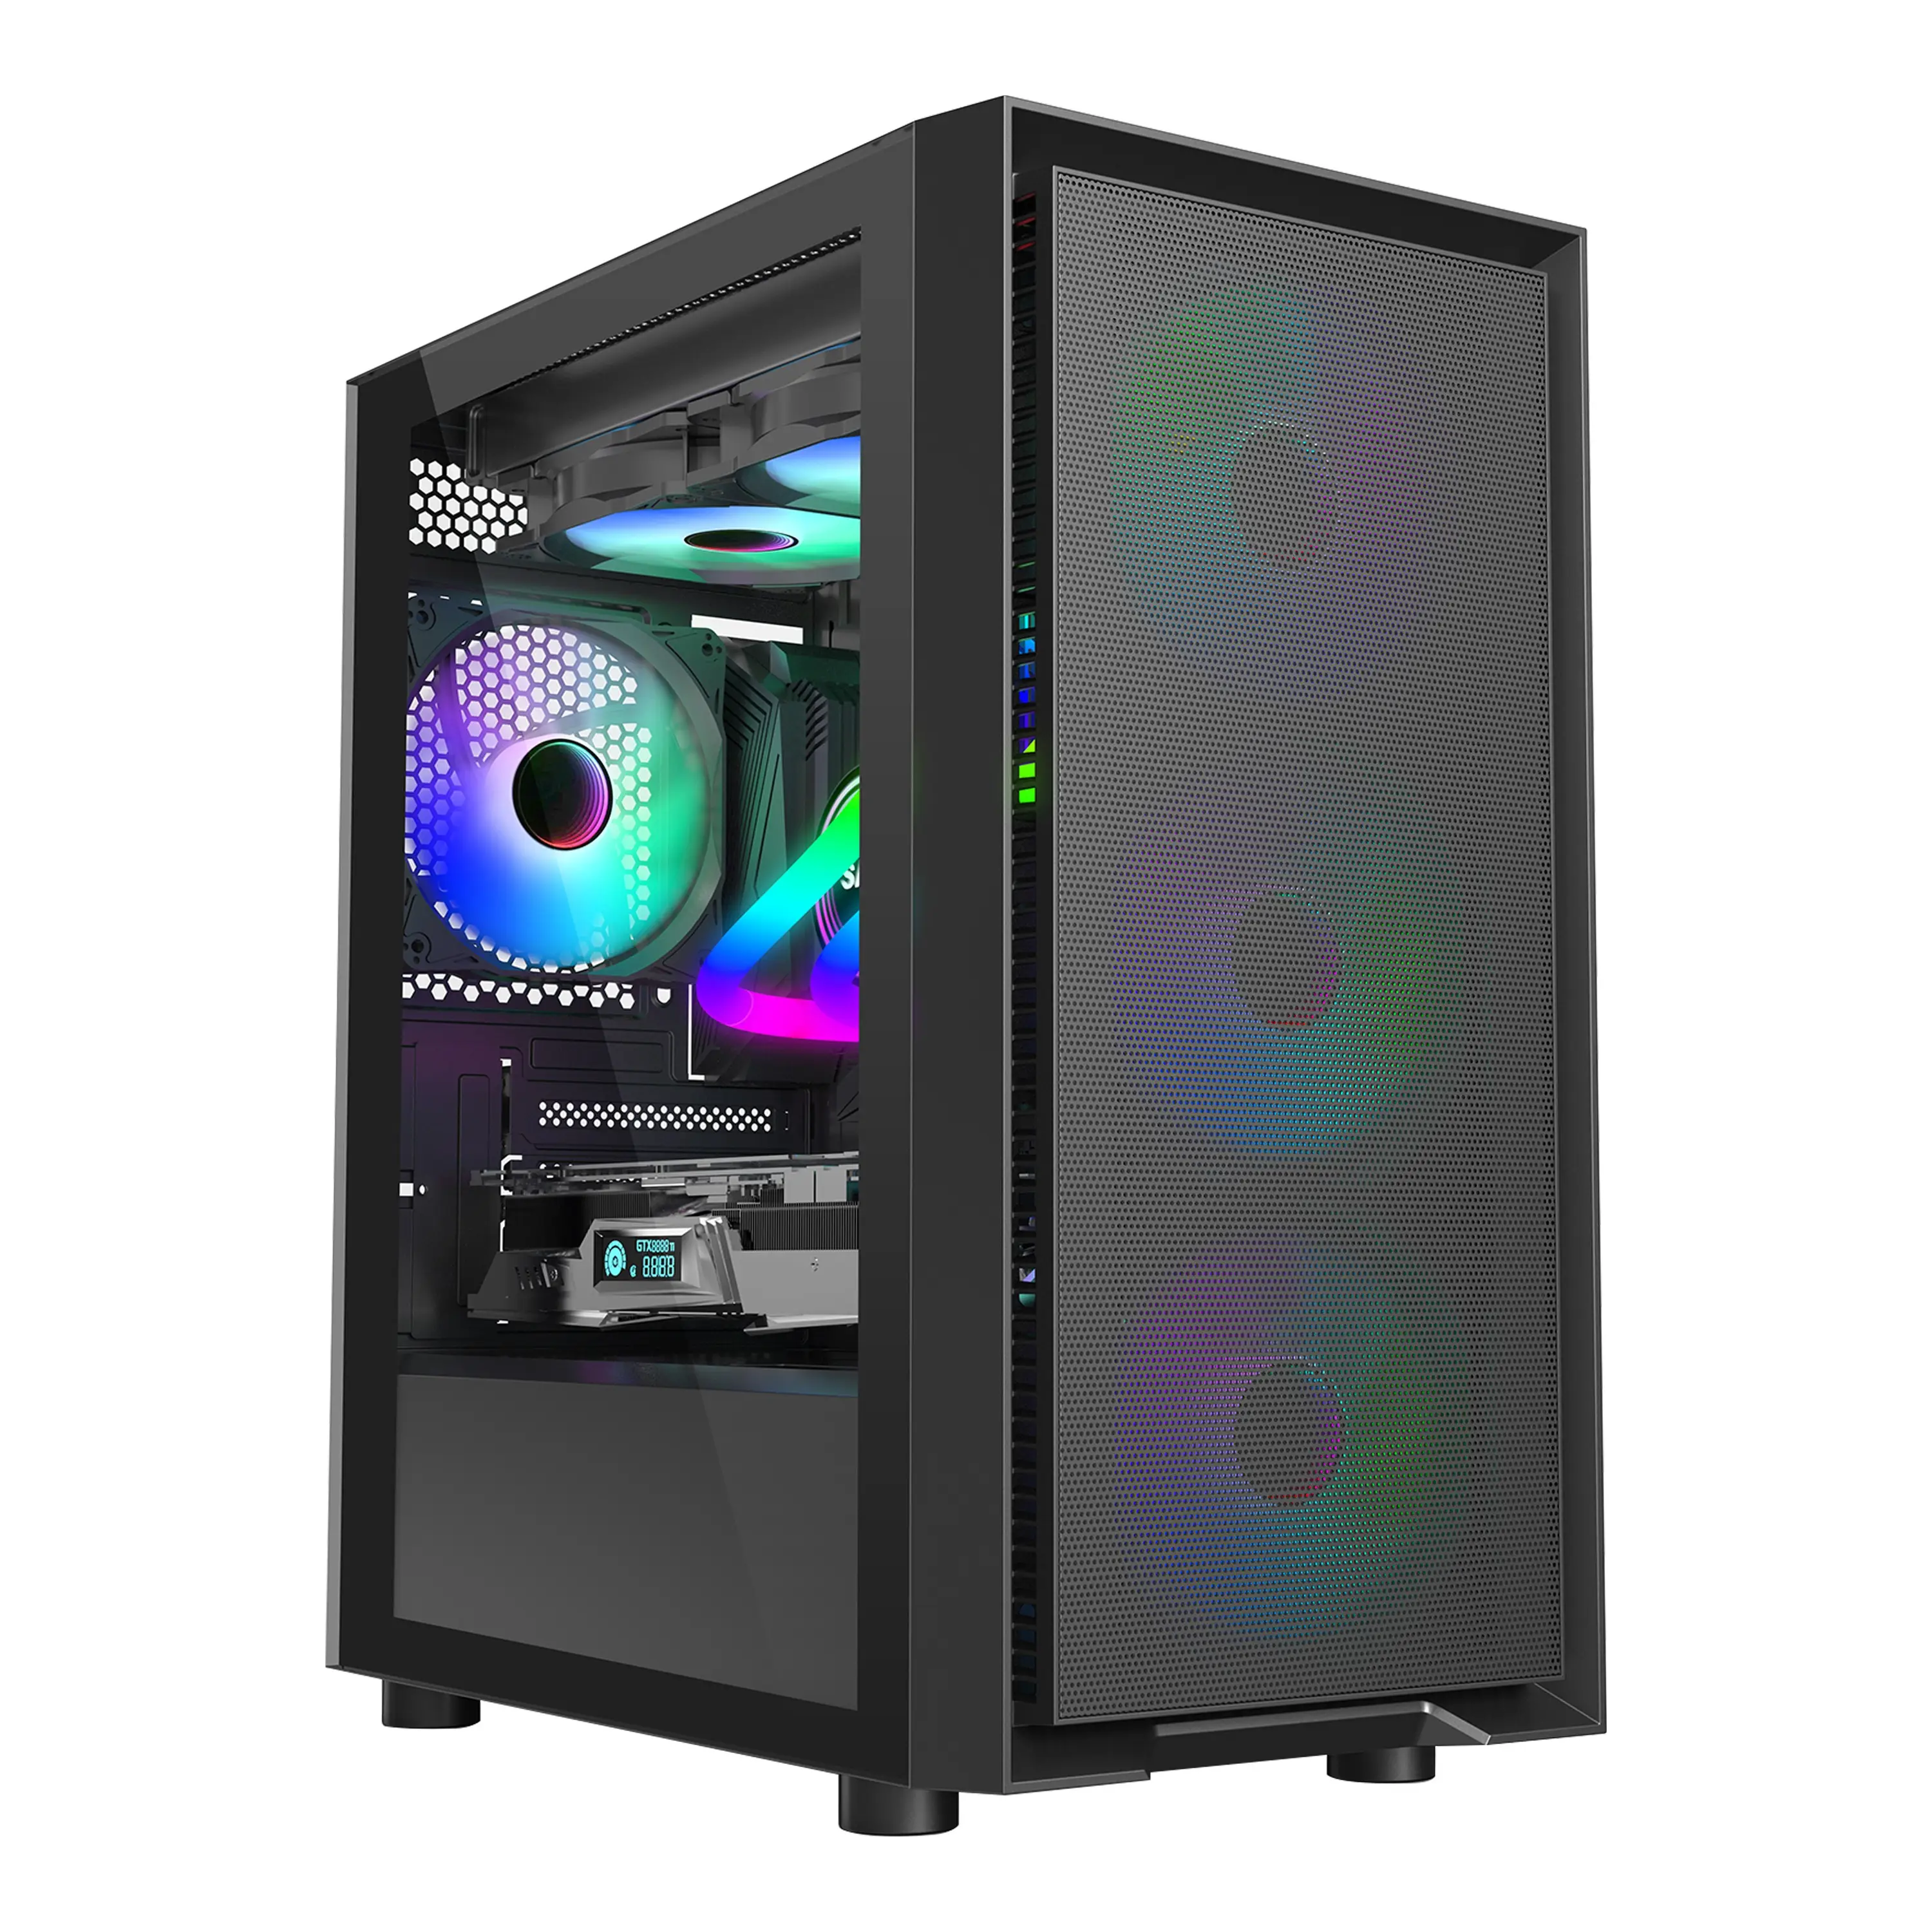 SAMA new arrival game computer case rtx 3090 pc cases customize Logo micro atx case with RGB cooling fans